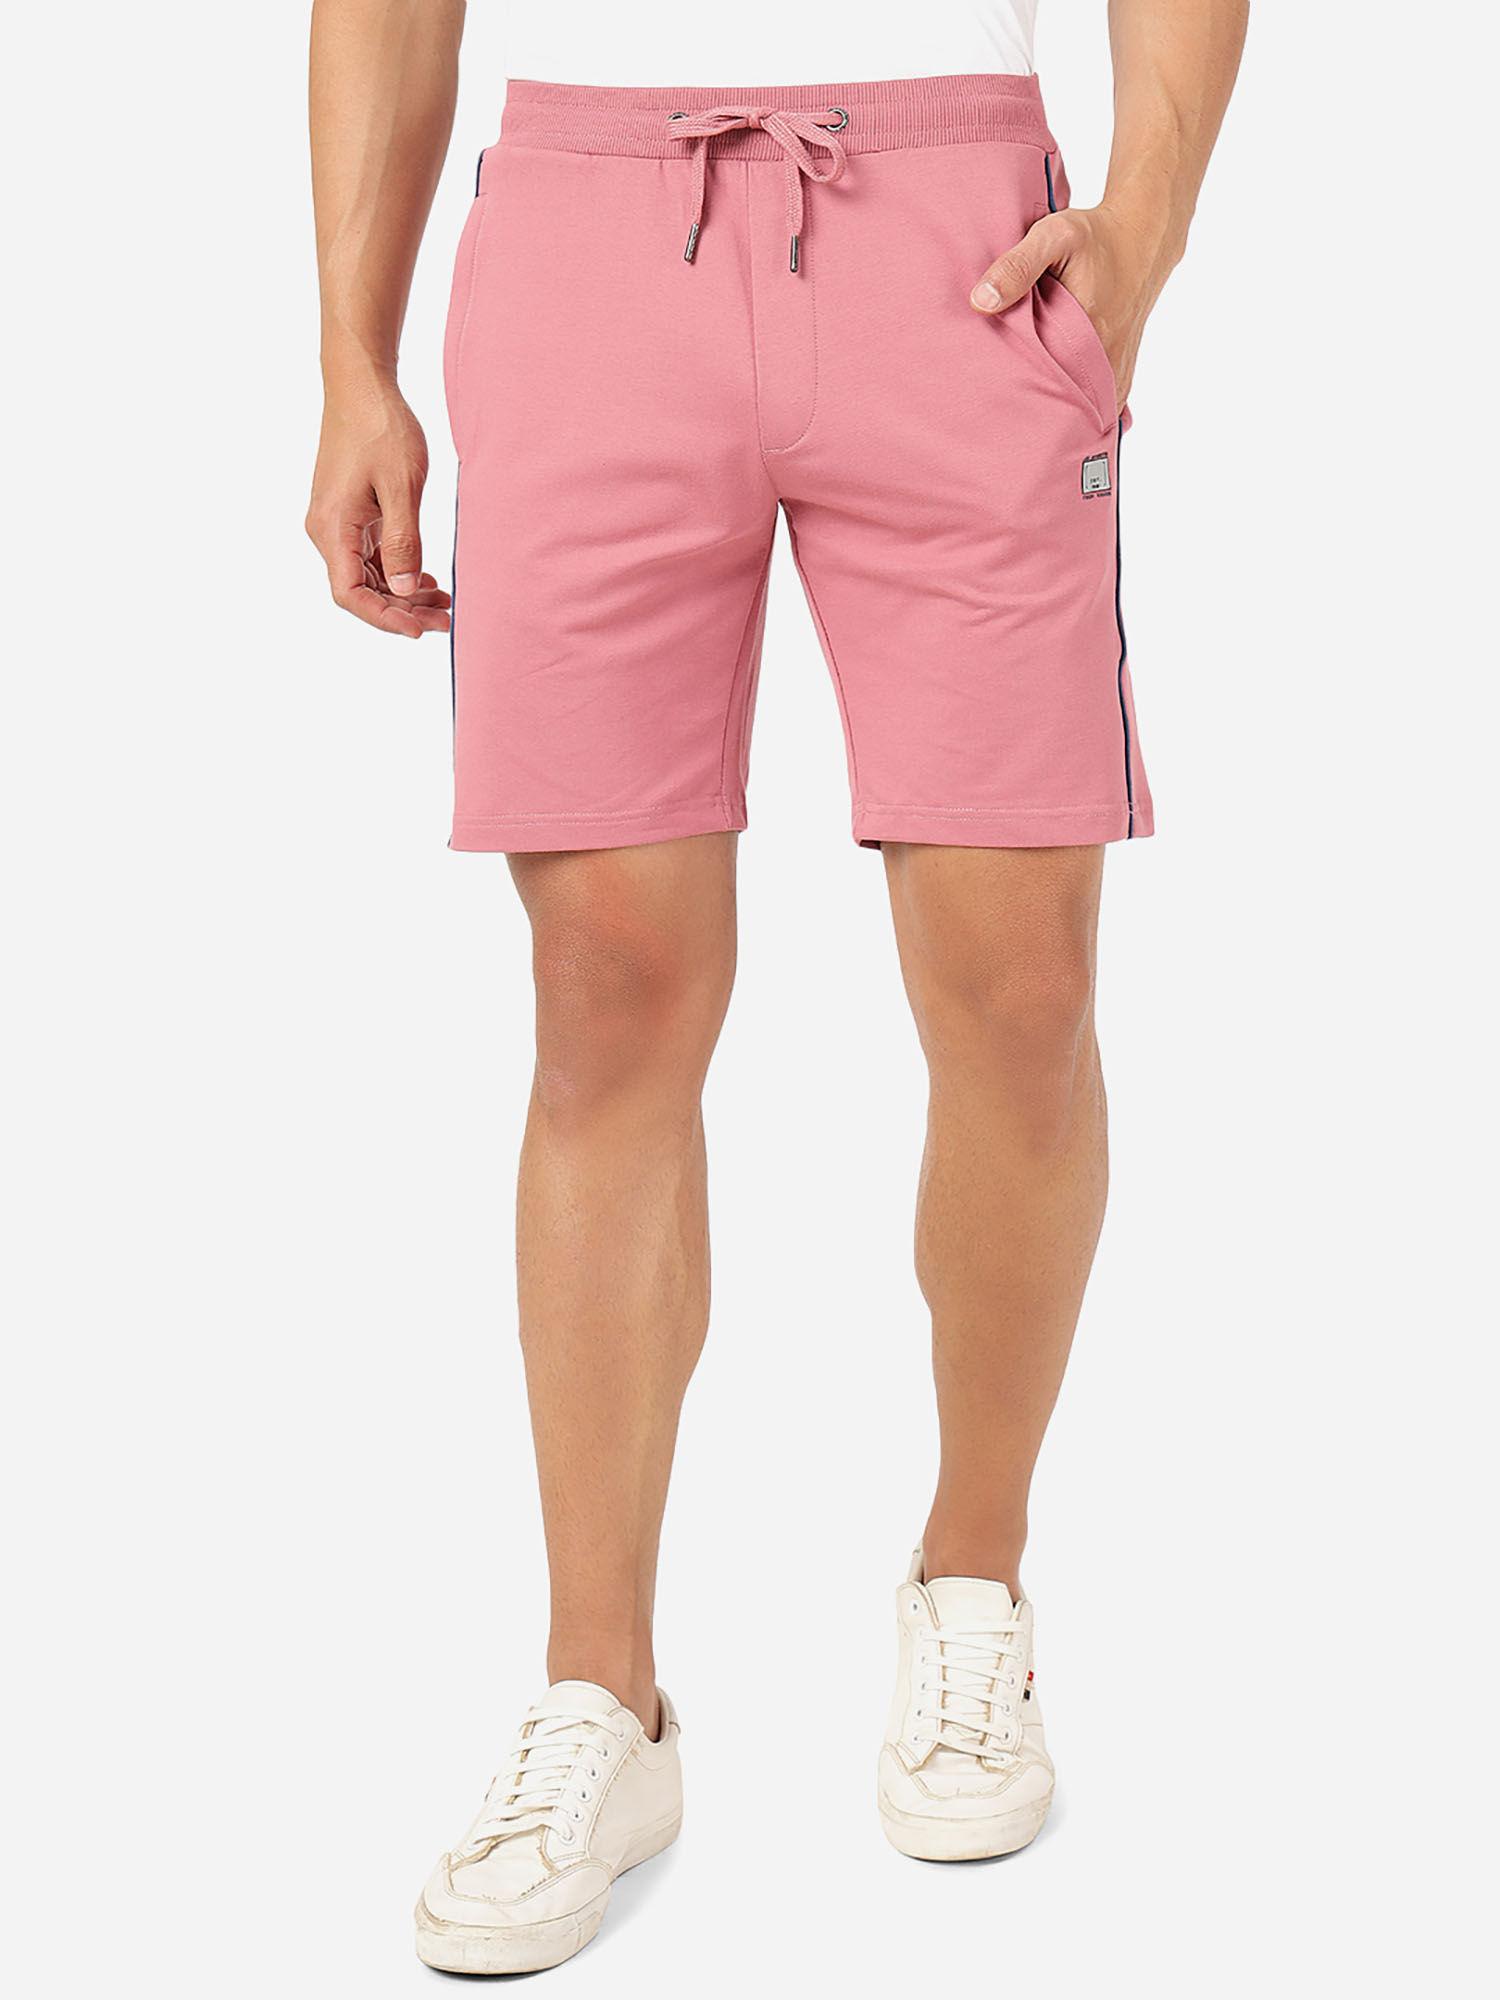 mens 100% cotton solid slim fit shorts pink